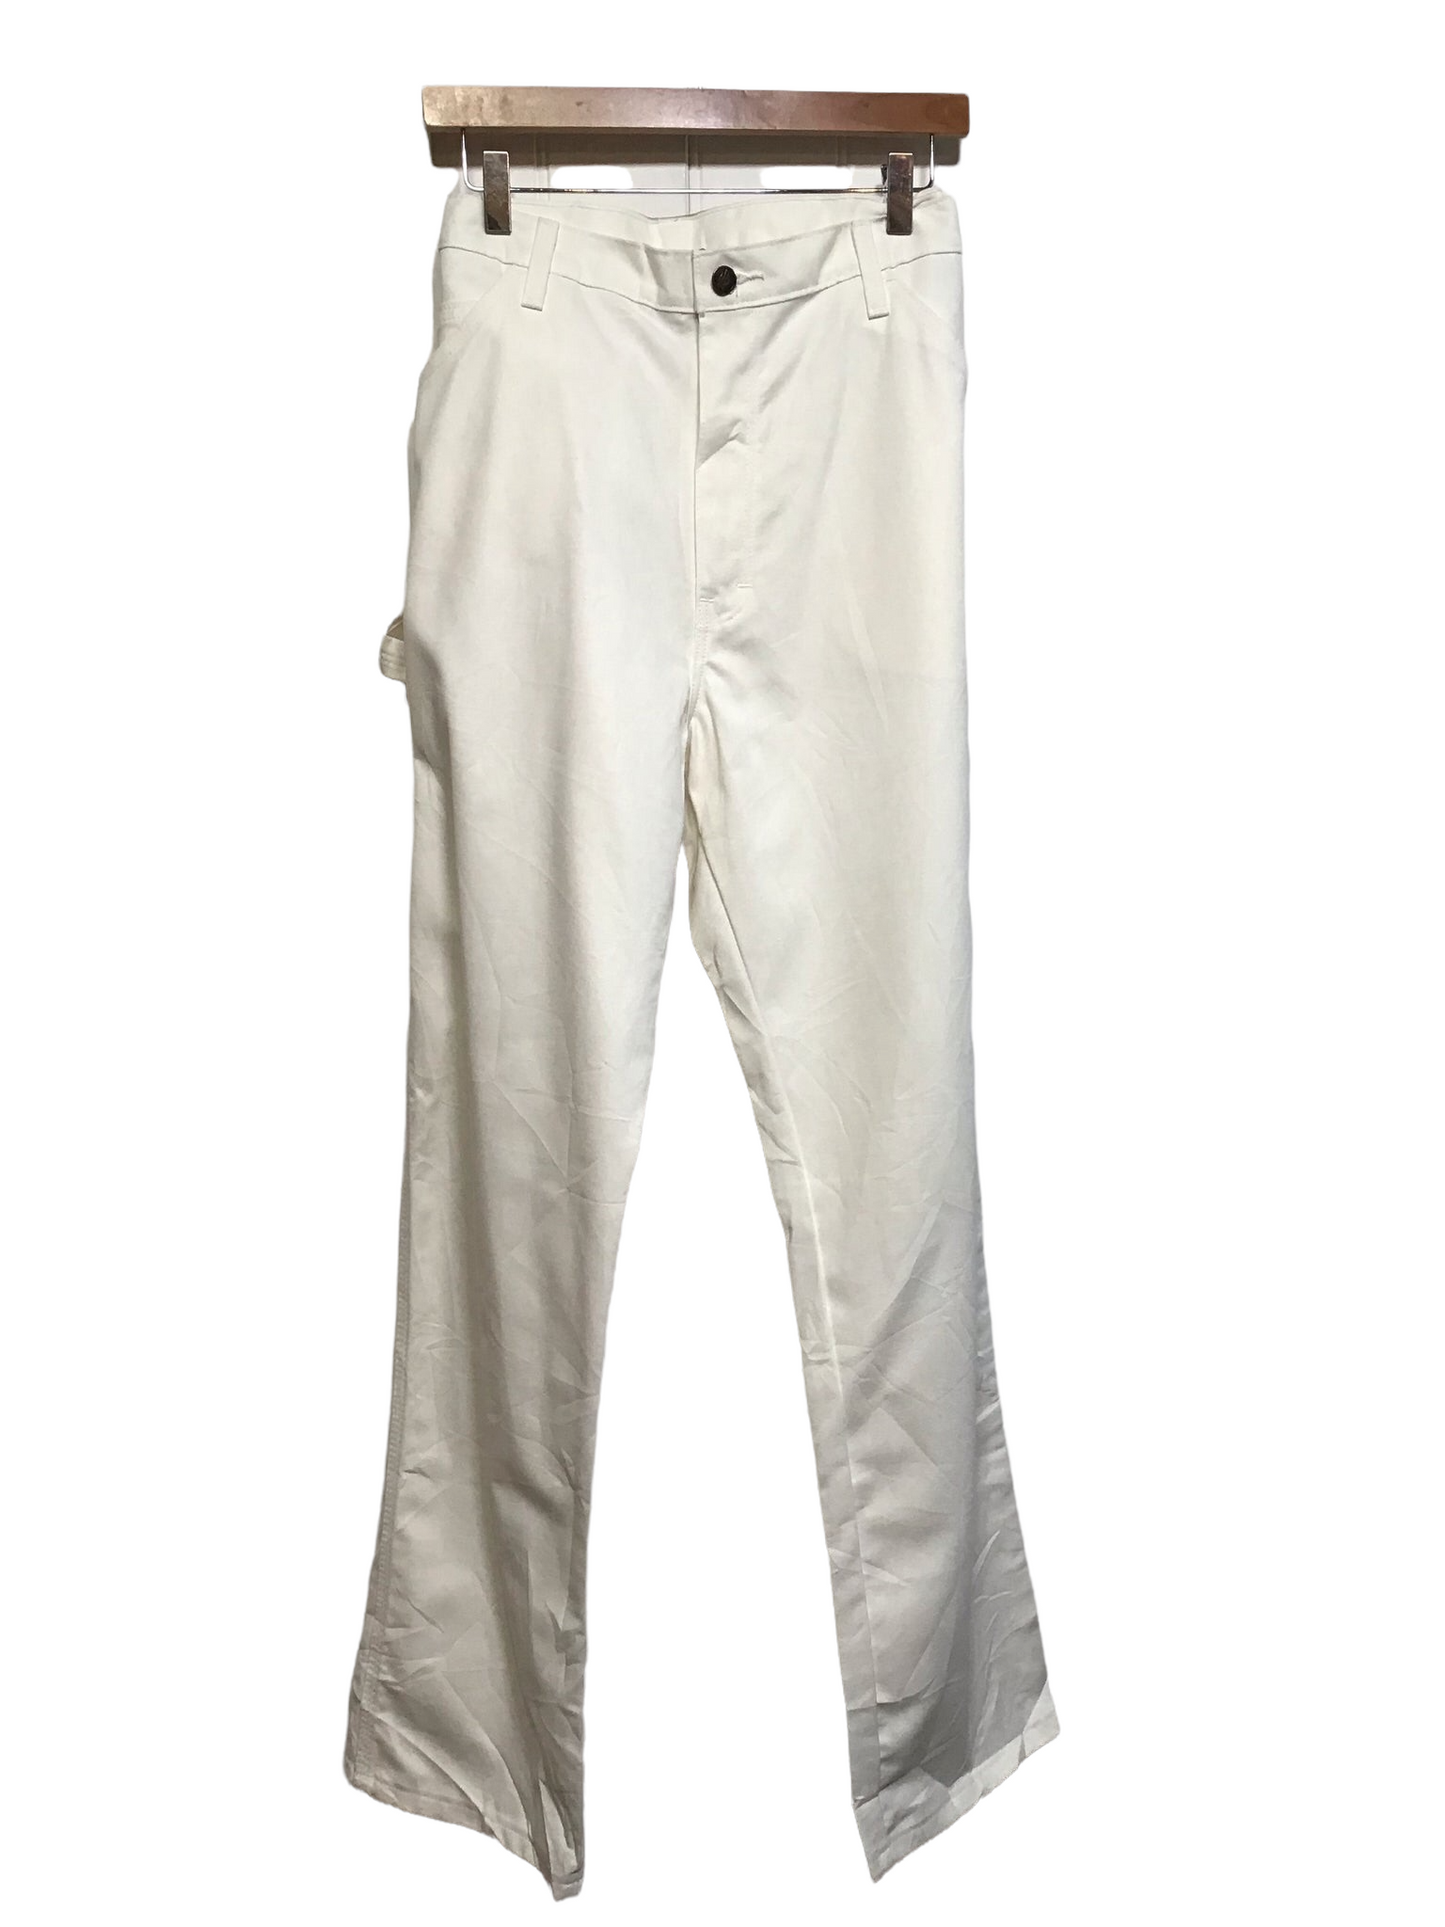 White Dickie Trousers (Size XL)